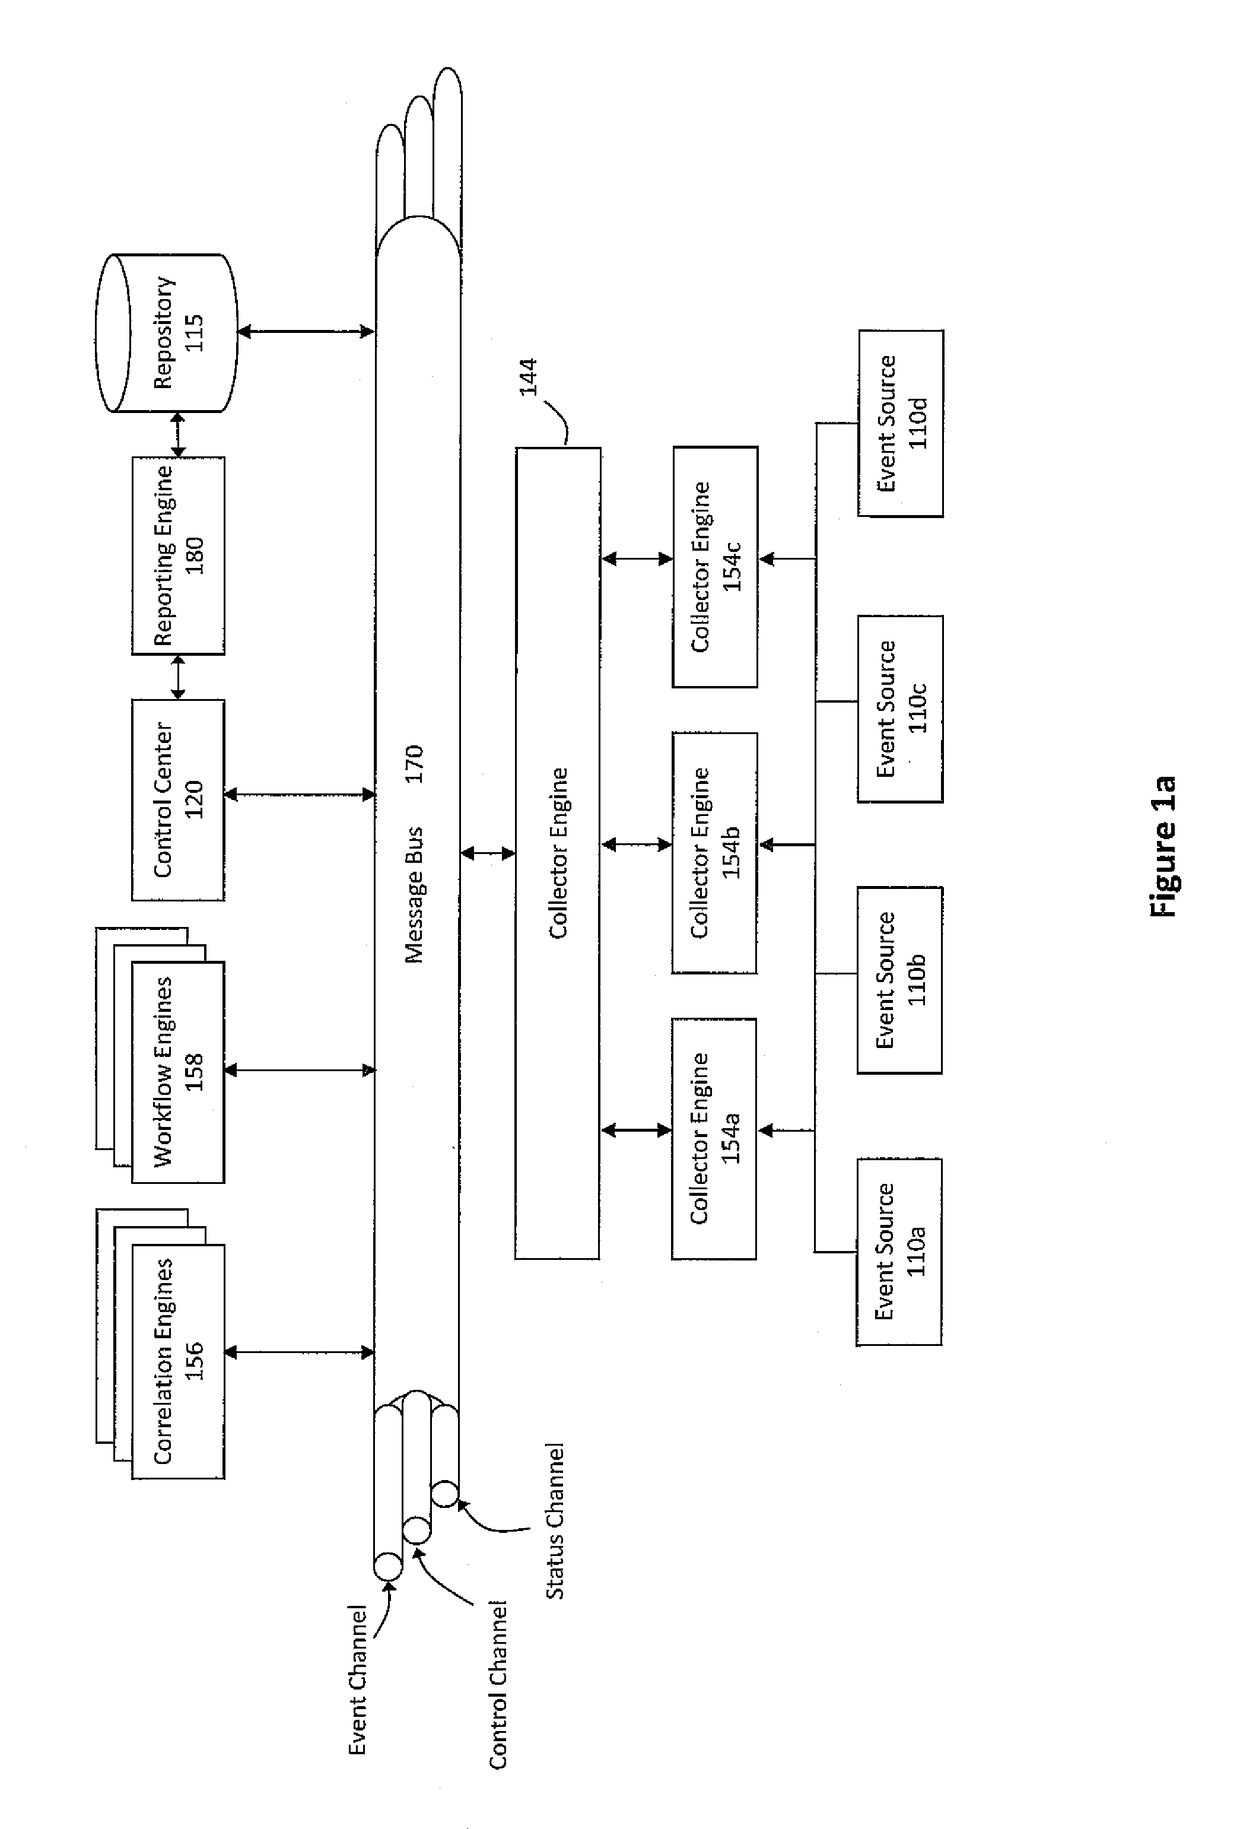 System and method for auditing governance, risk, and compliance using a pluggable correlation architecture